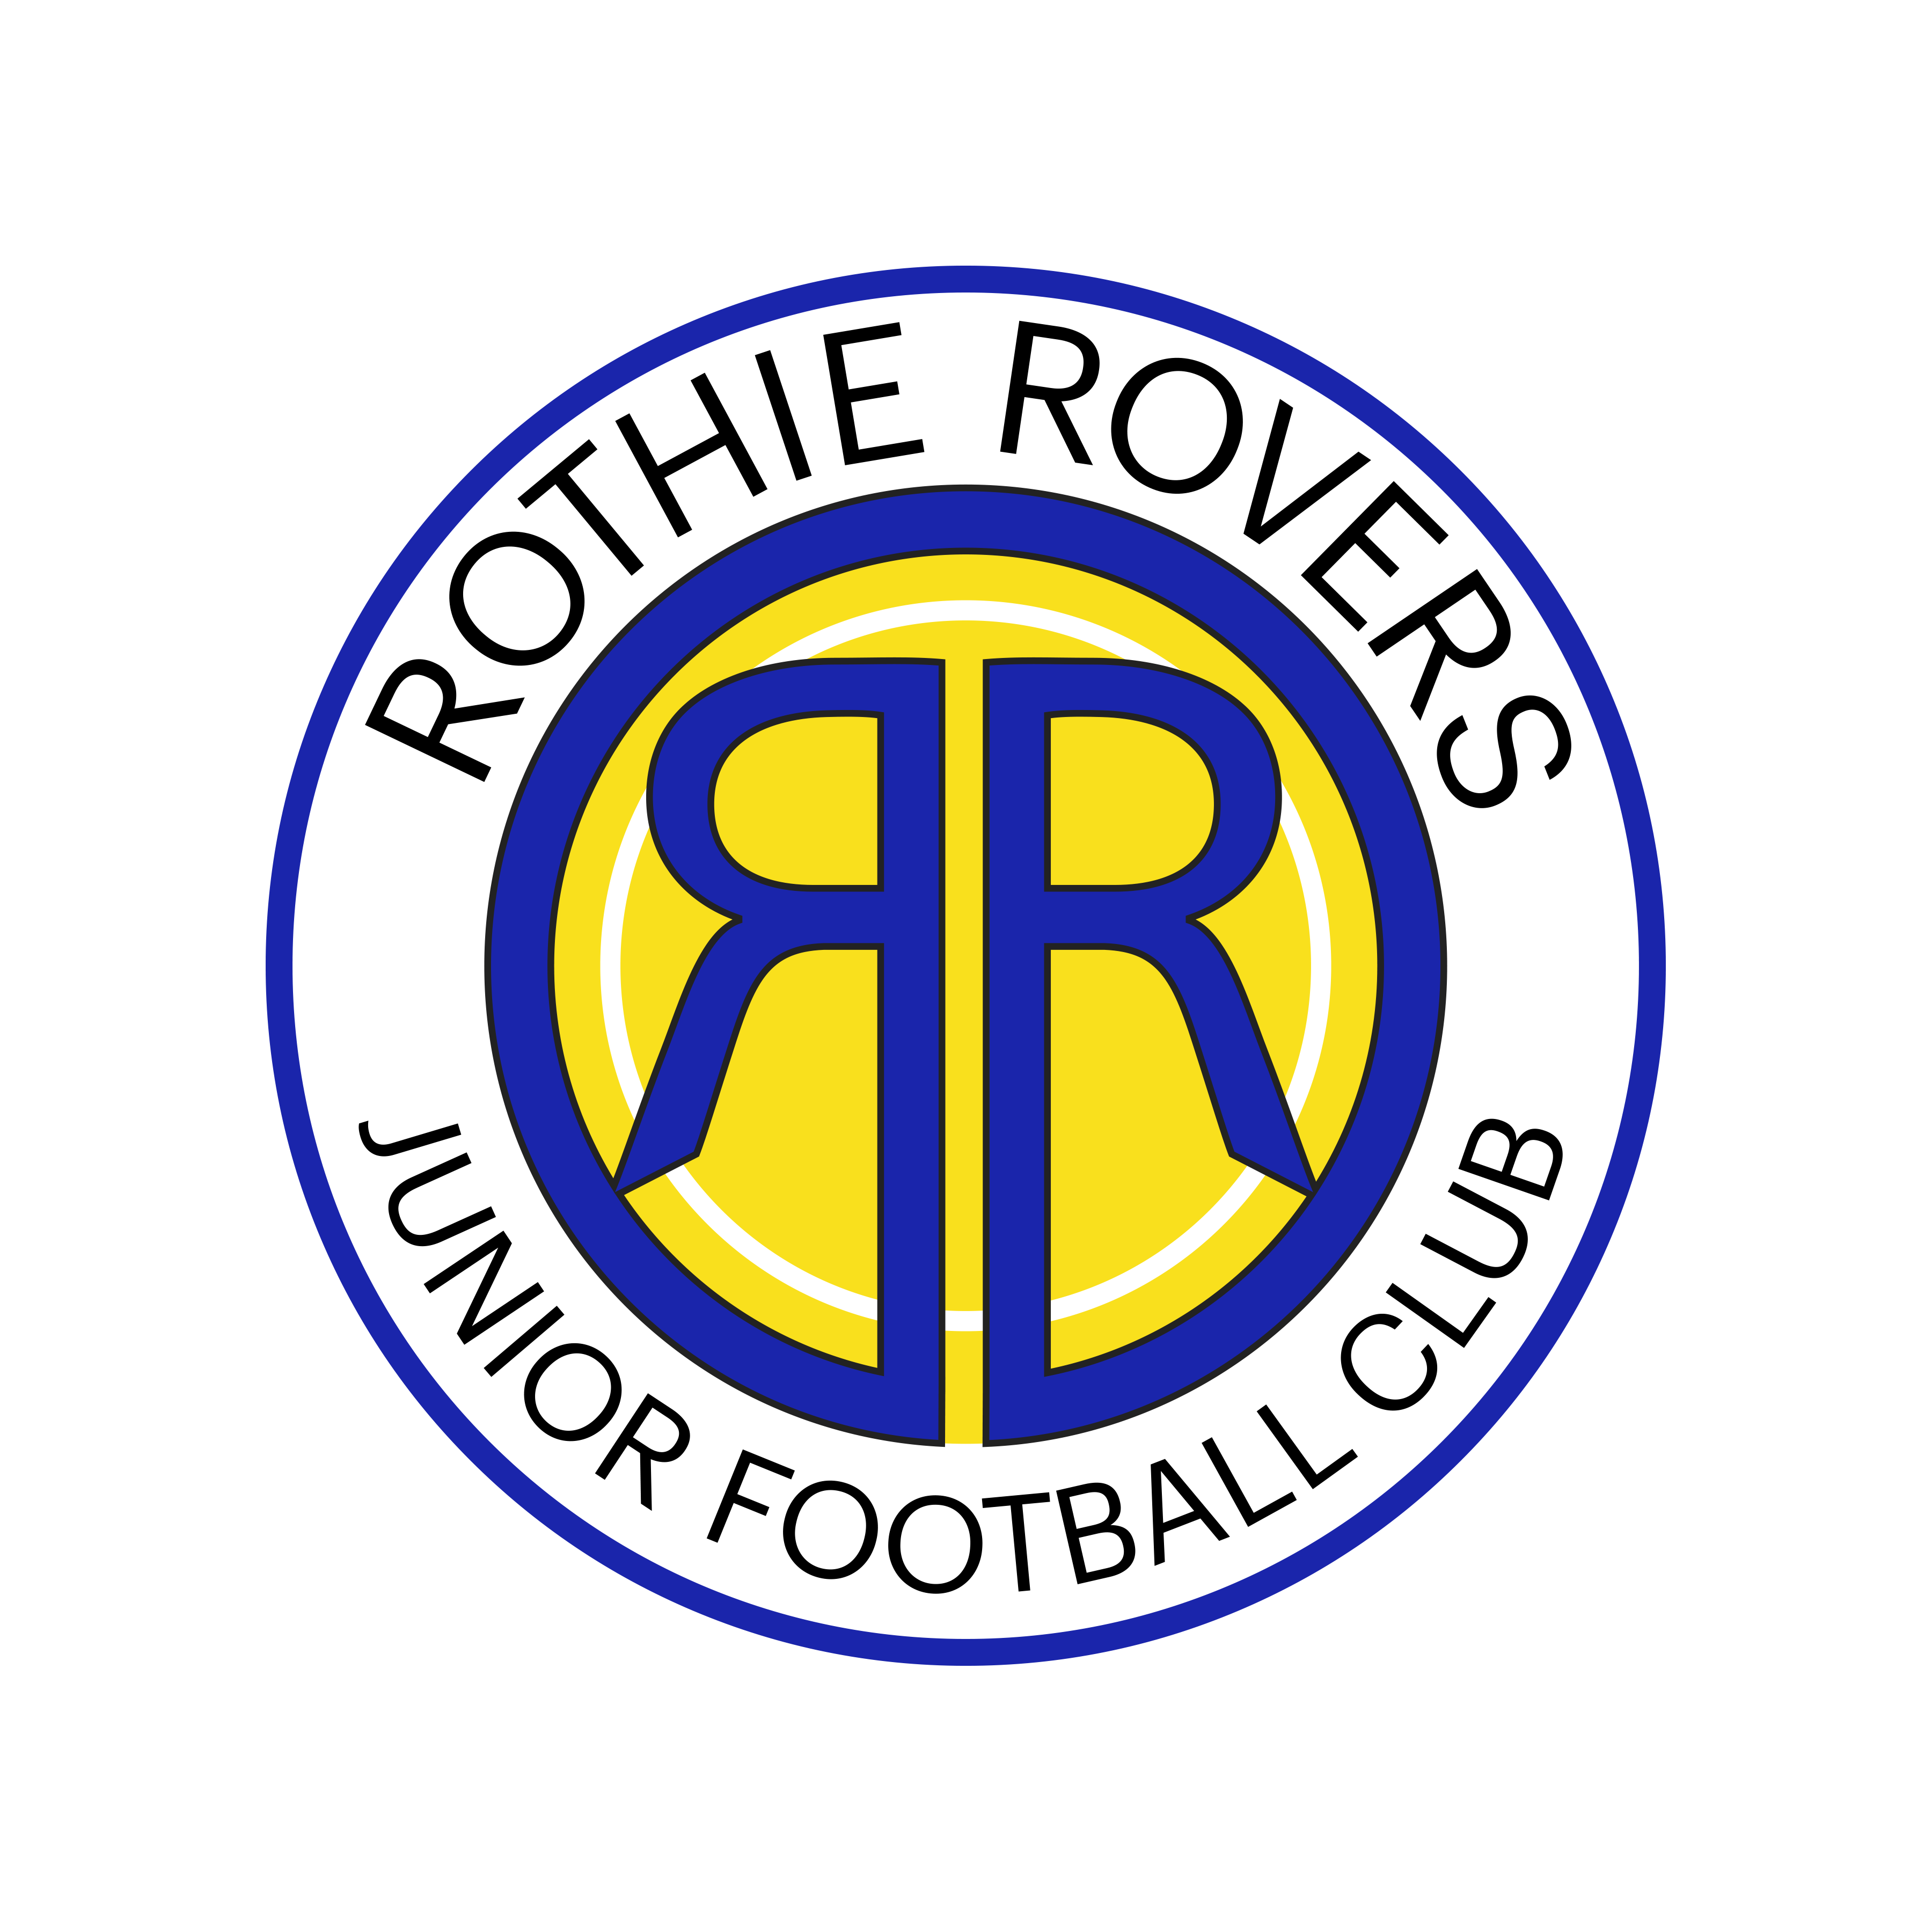 Rothie Rovers AFC